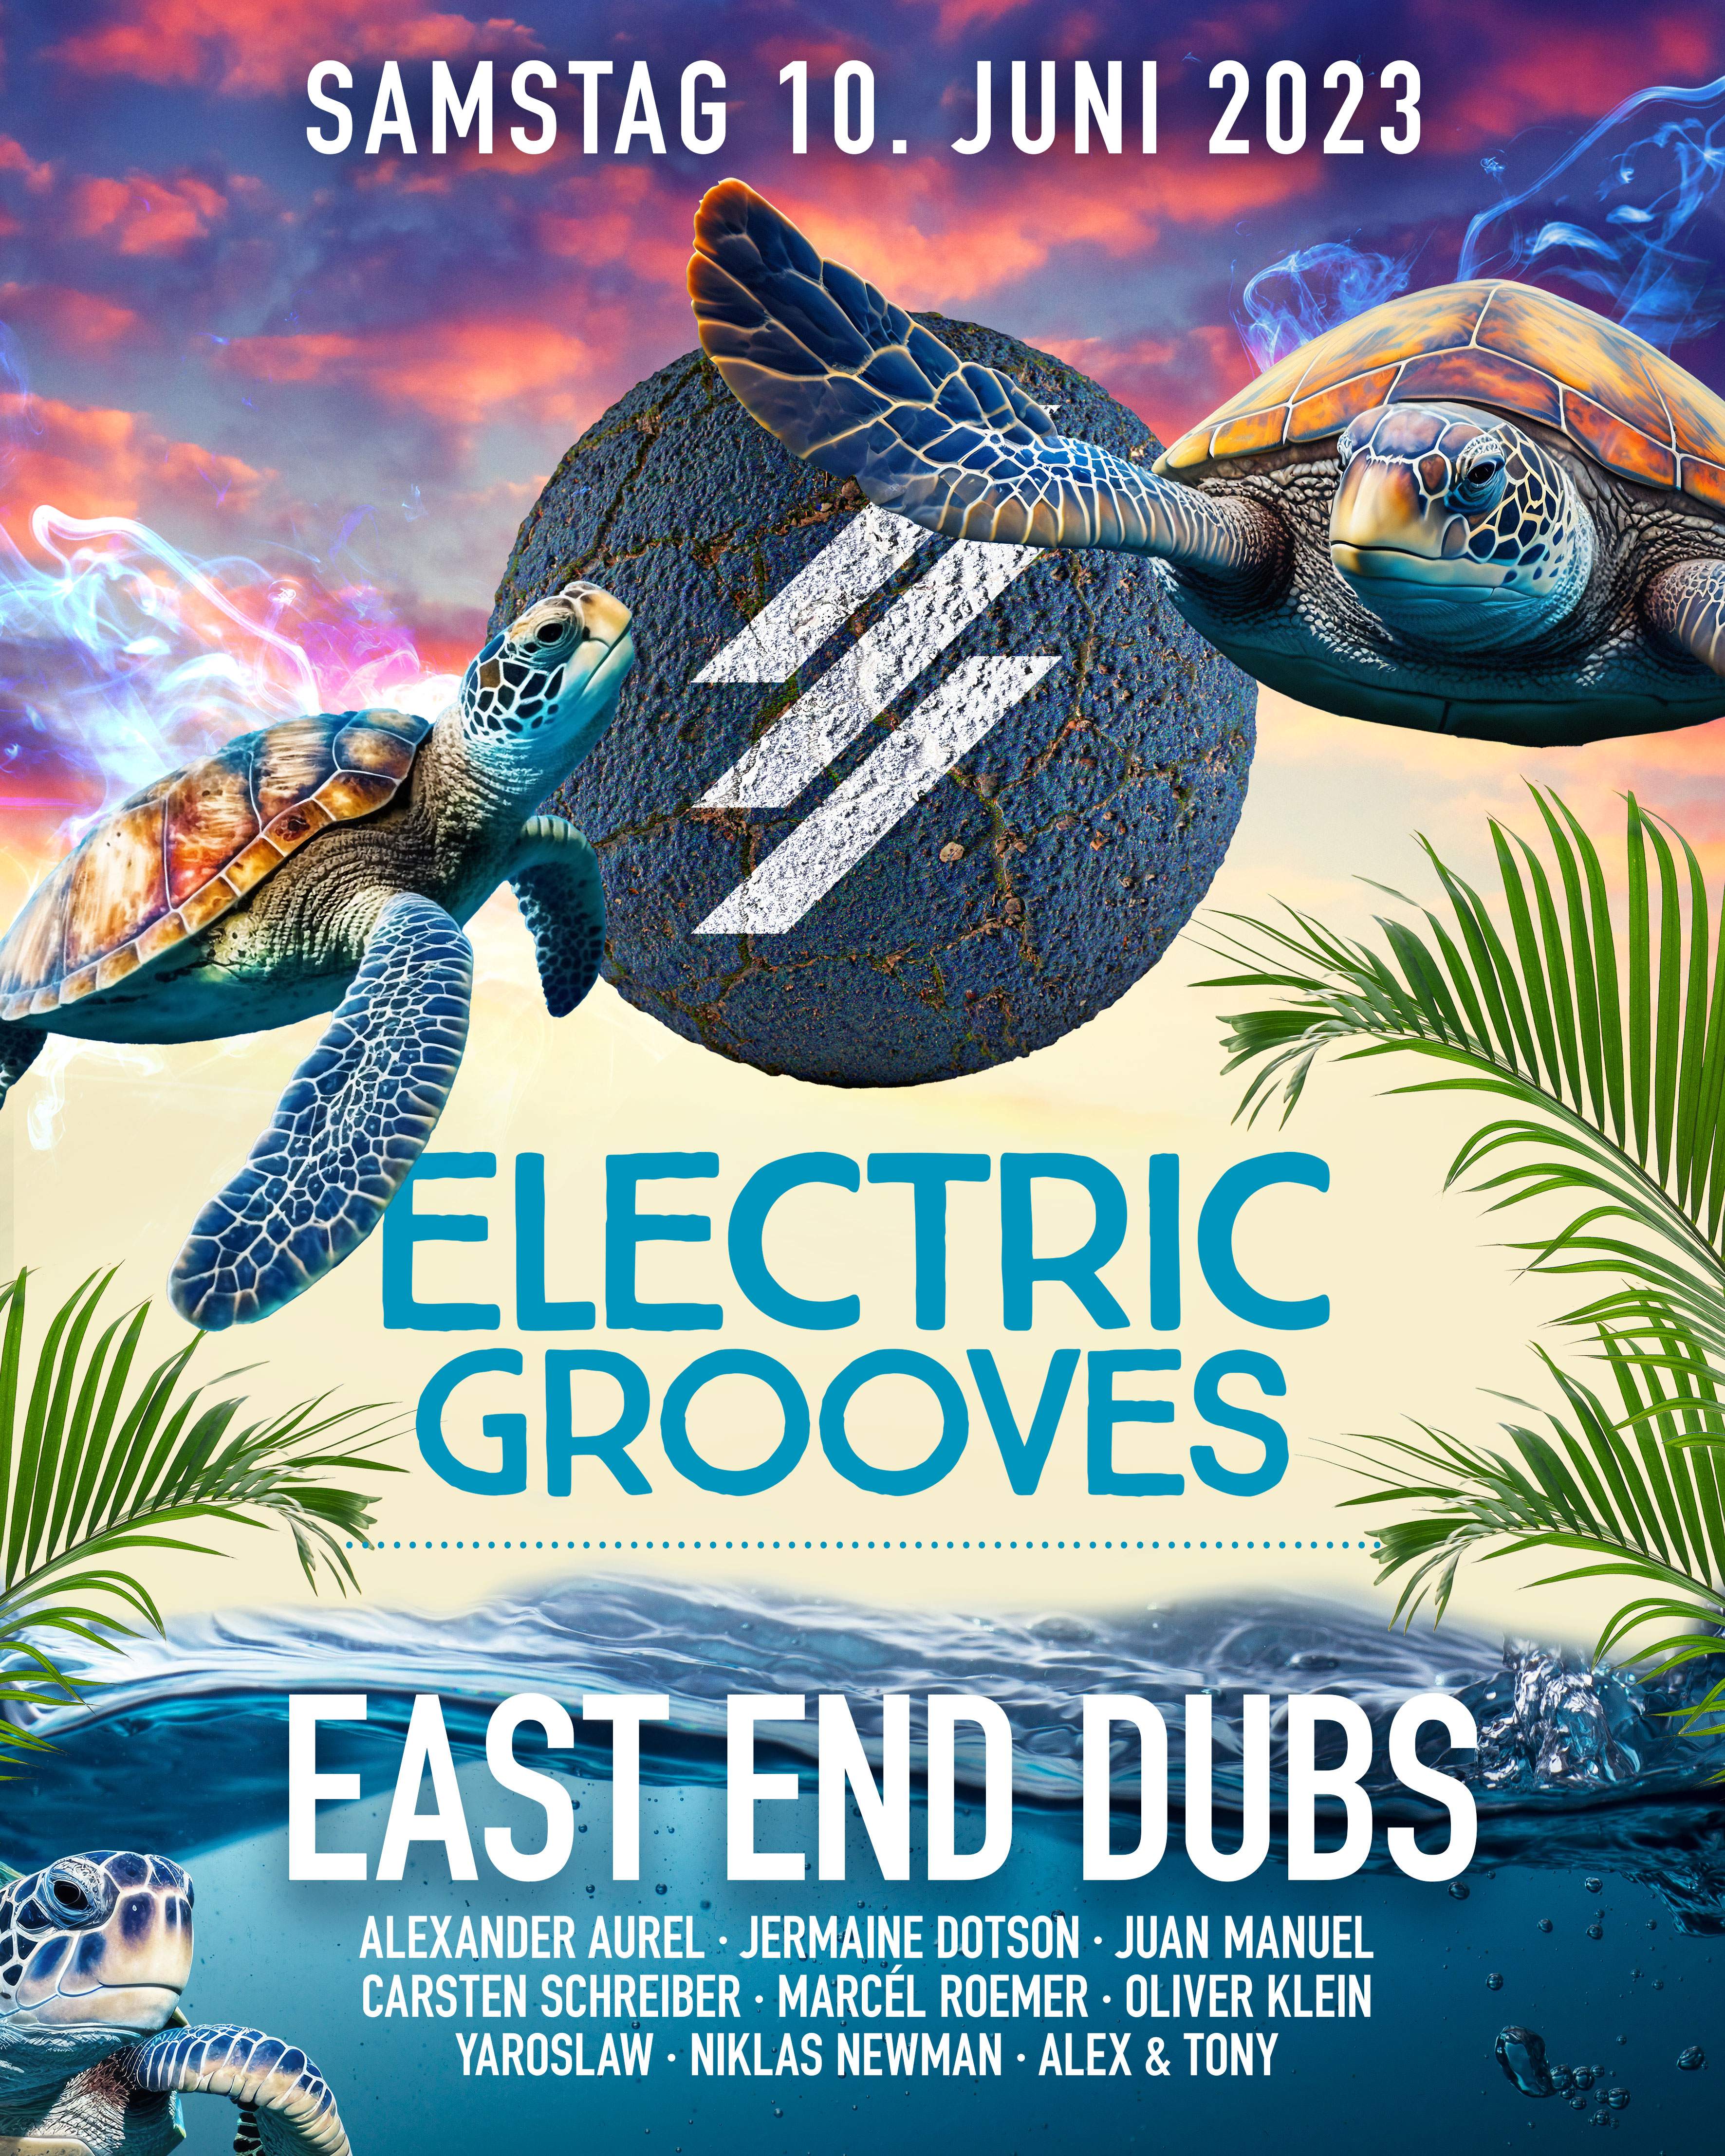 Electric Grooves with East End Dubs - フライヤー表